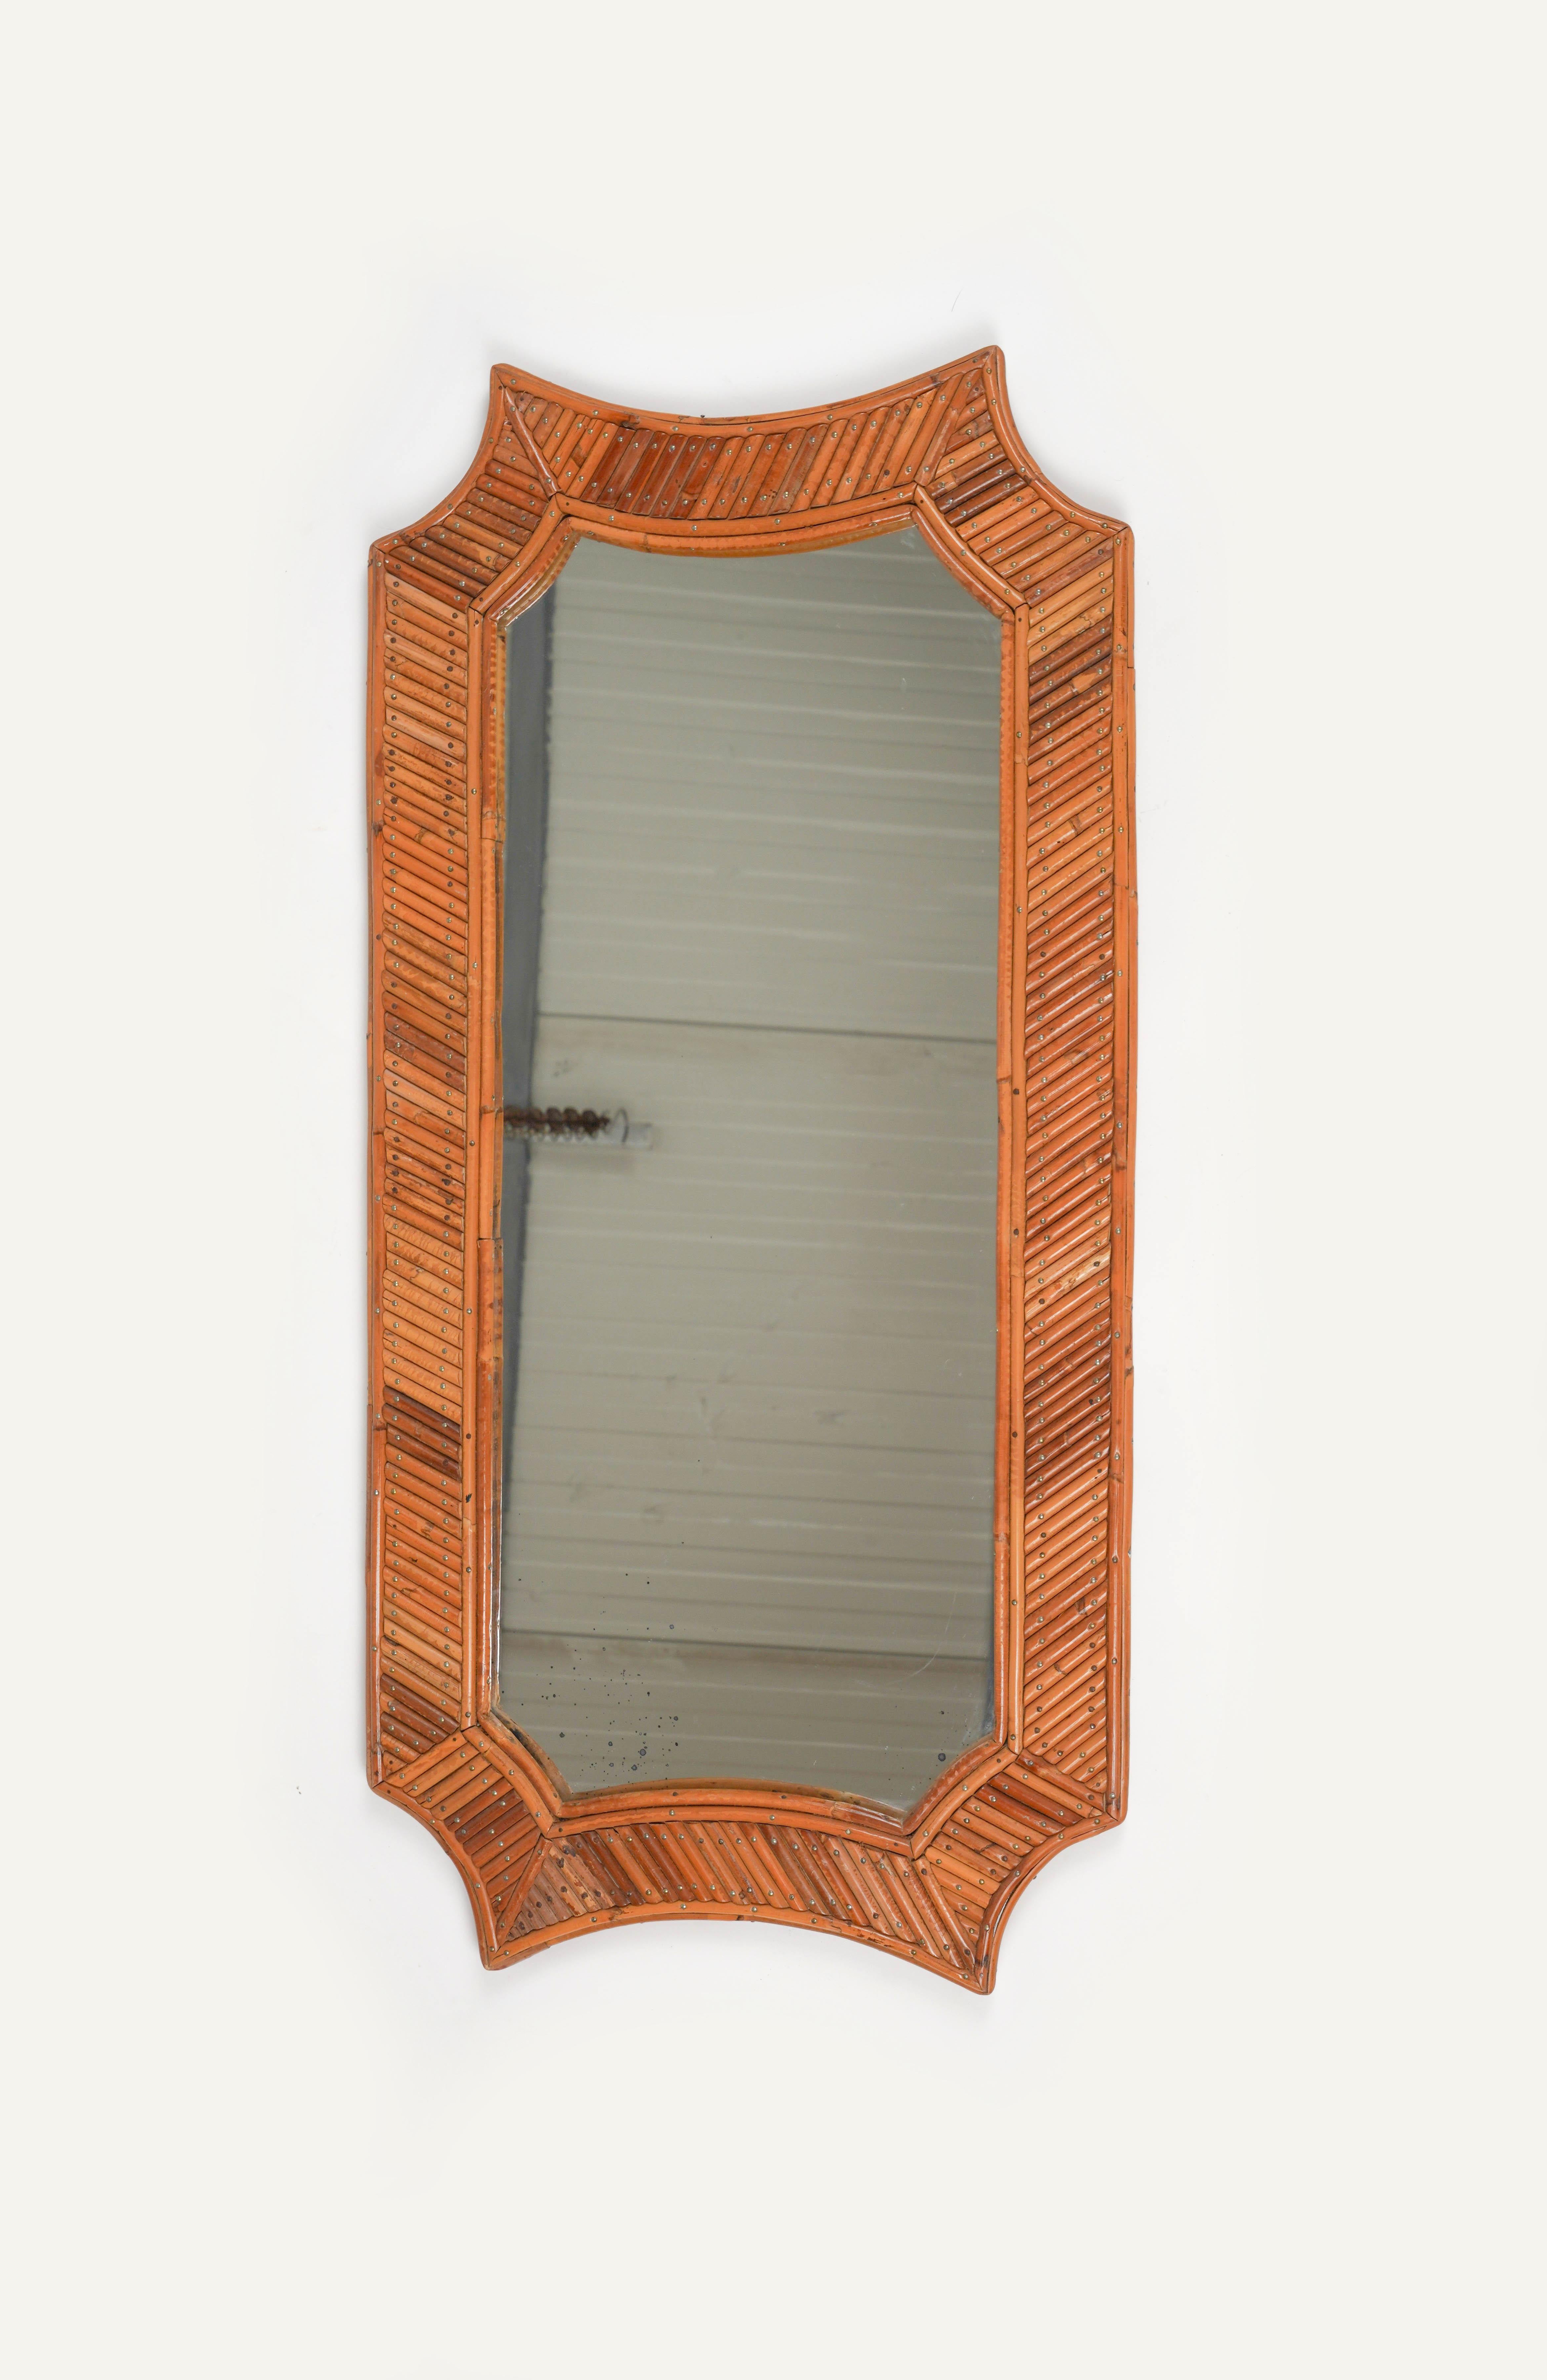 Italian Bamboo and Rattan Geometric Wall Mirror Vivai Del Sud Style, Italy 1960s For Sale